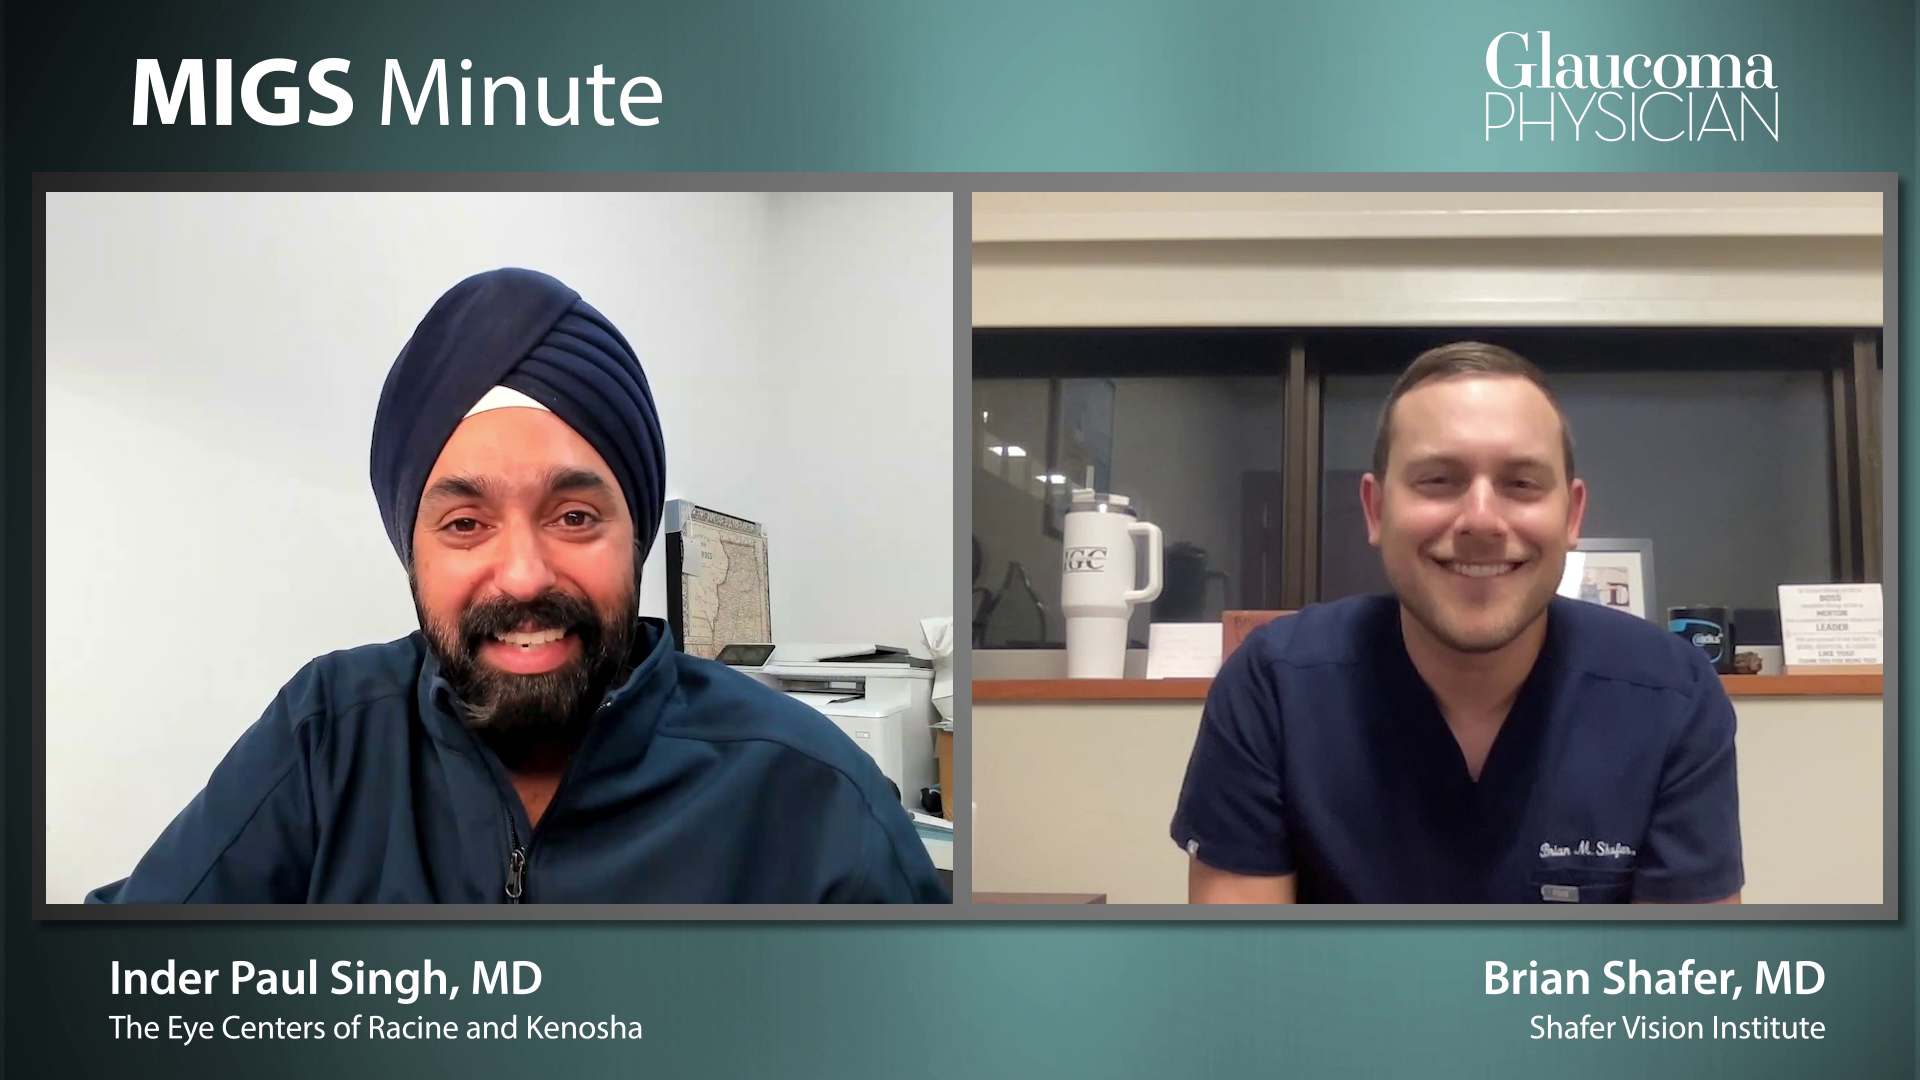 Episode 18: Inder Paul Singh, MD, and Brian Shafer, MD, discuss operationalizing interventional glaucoma treatment in a practice.